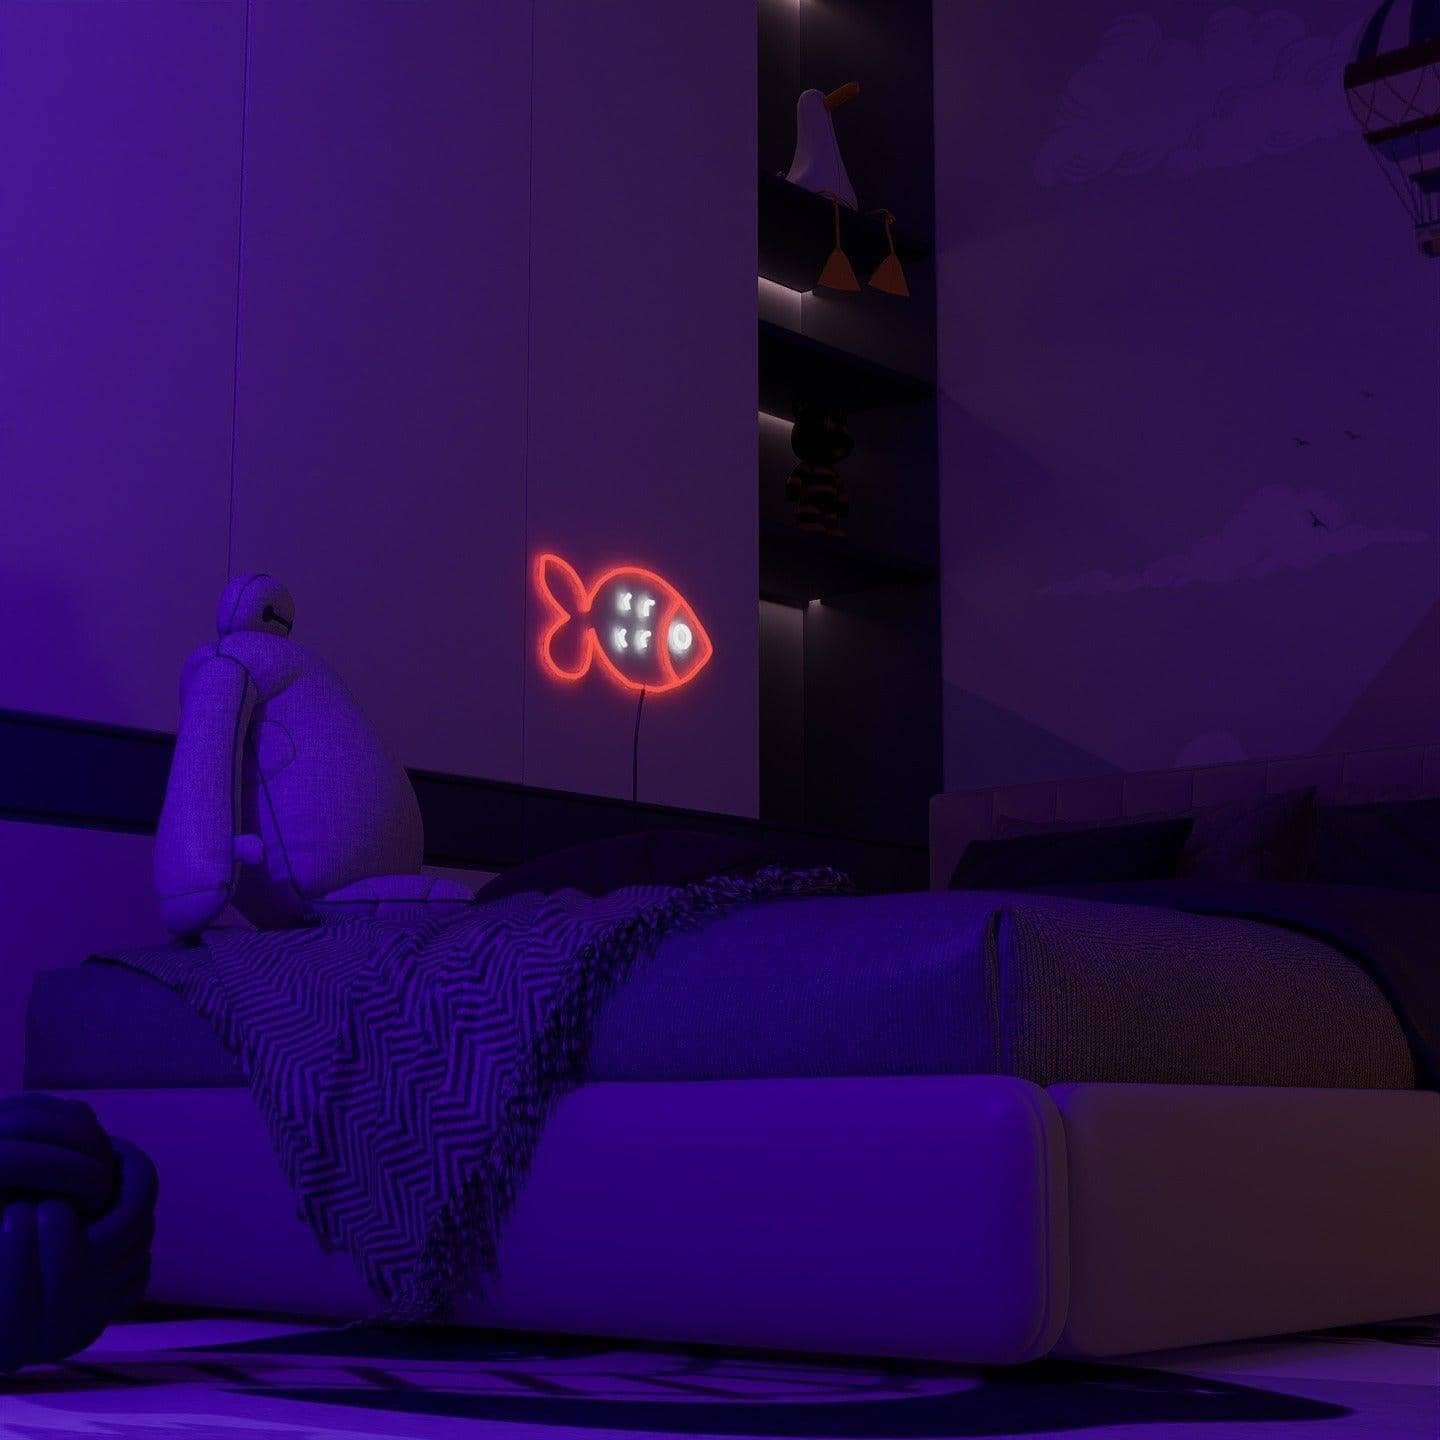 light-up-neon-lights-and-hang-them-in-your-bedroom-for-display-fishy-friend-red